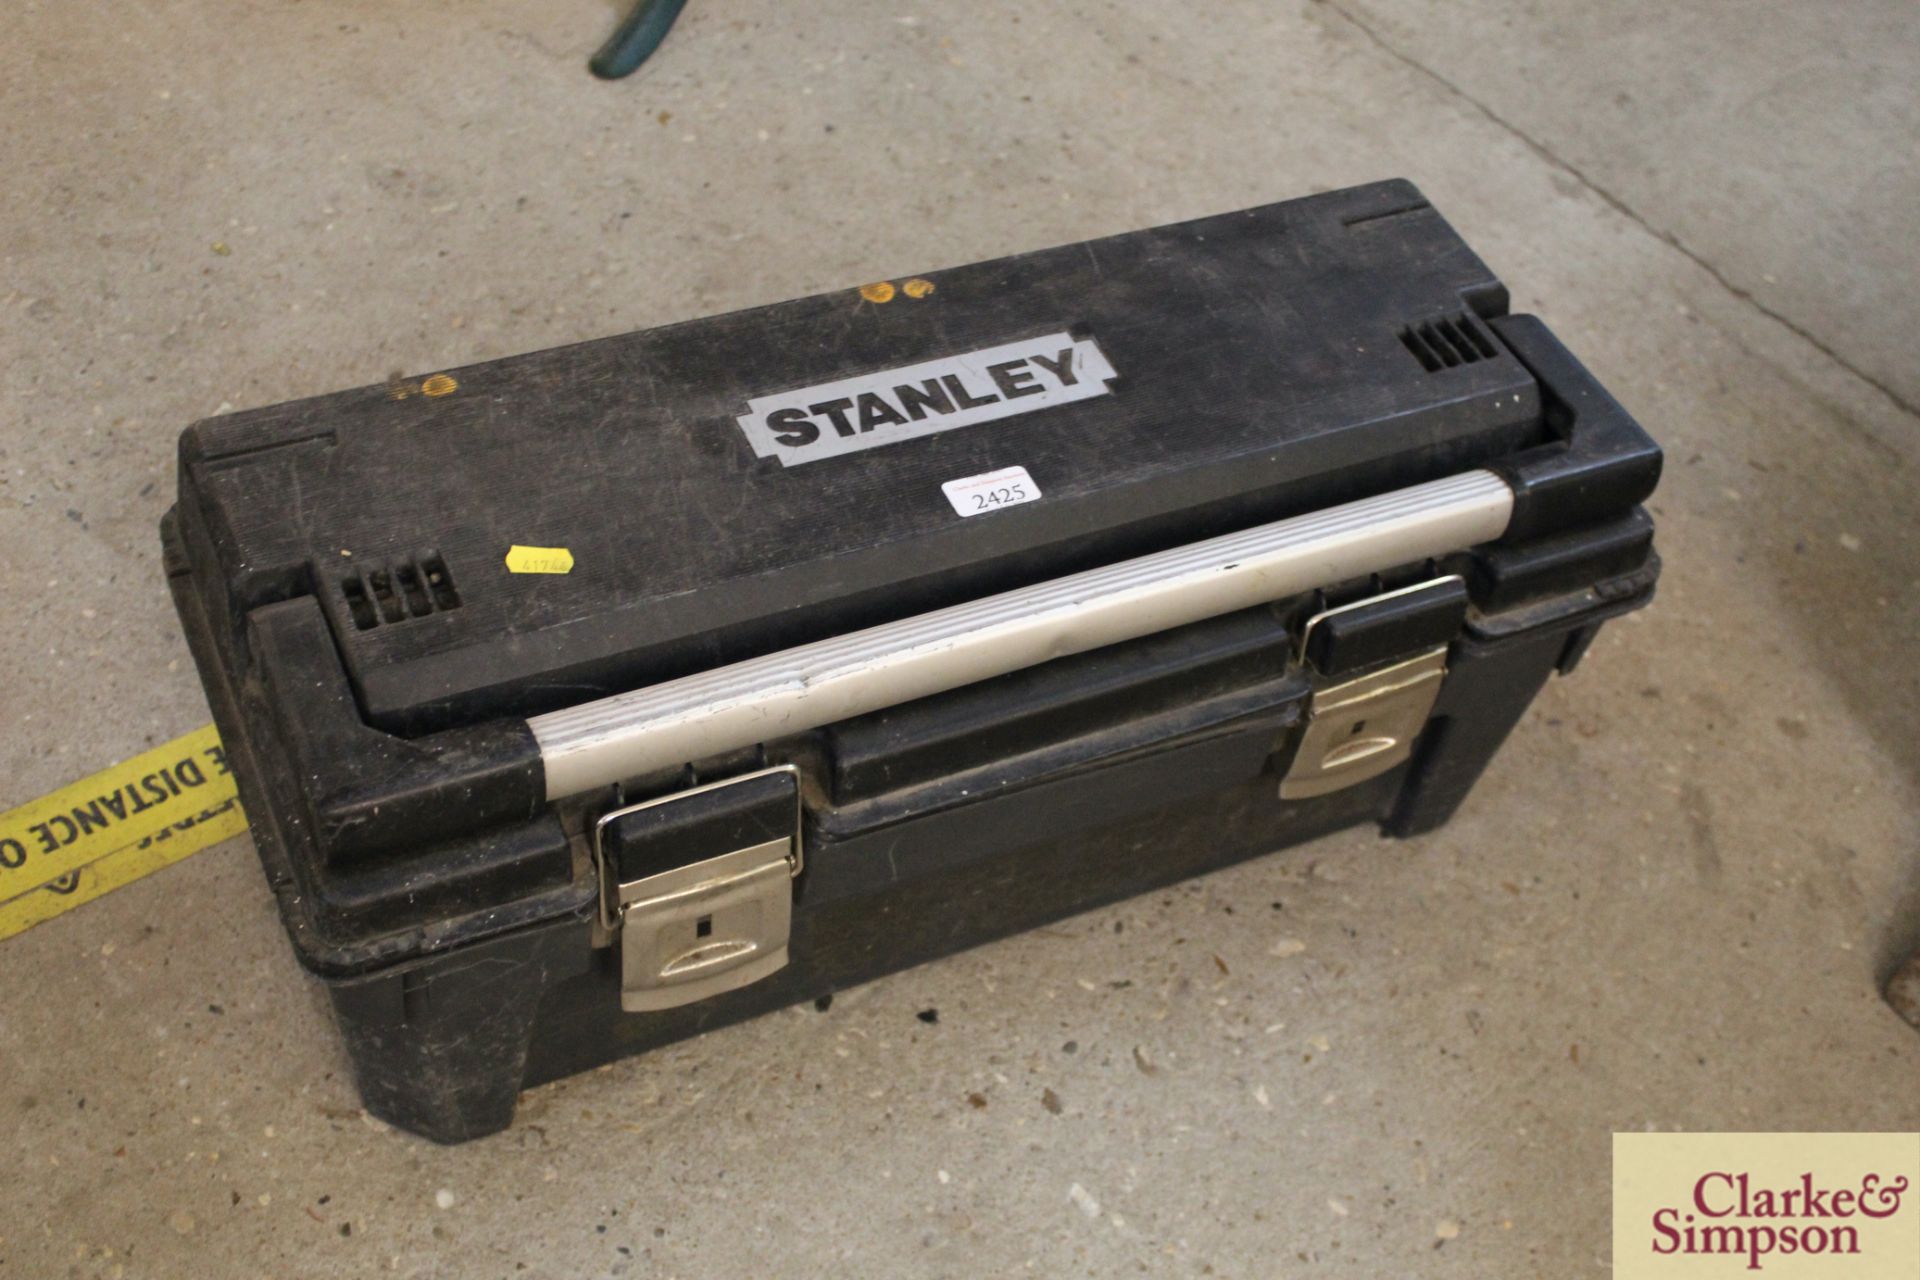 Stanley tool box with contents of tools.